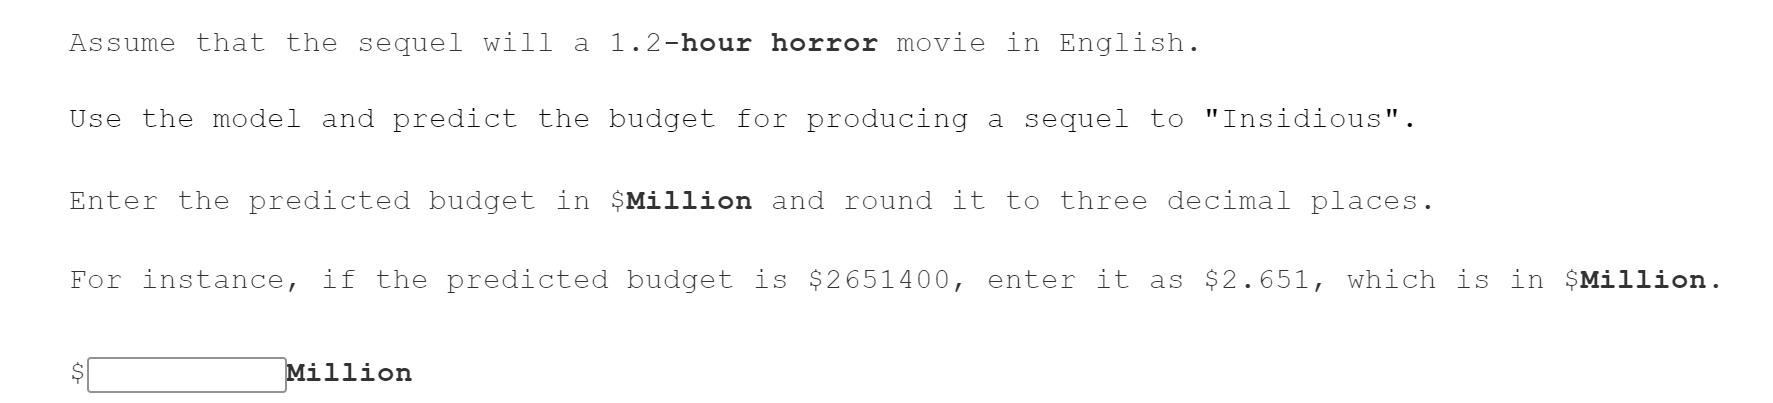 Assume that the sequel will a 1.2-hour horror movie in English. Use the model and predict the budget for